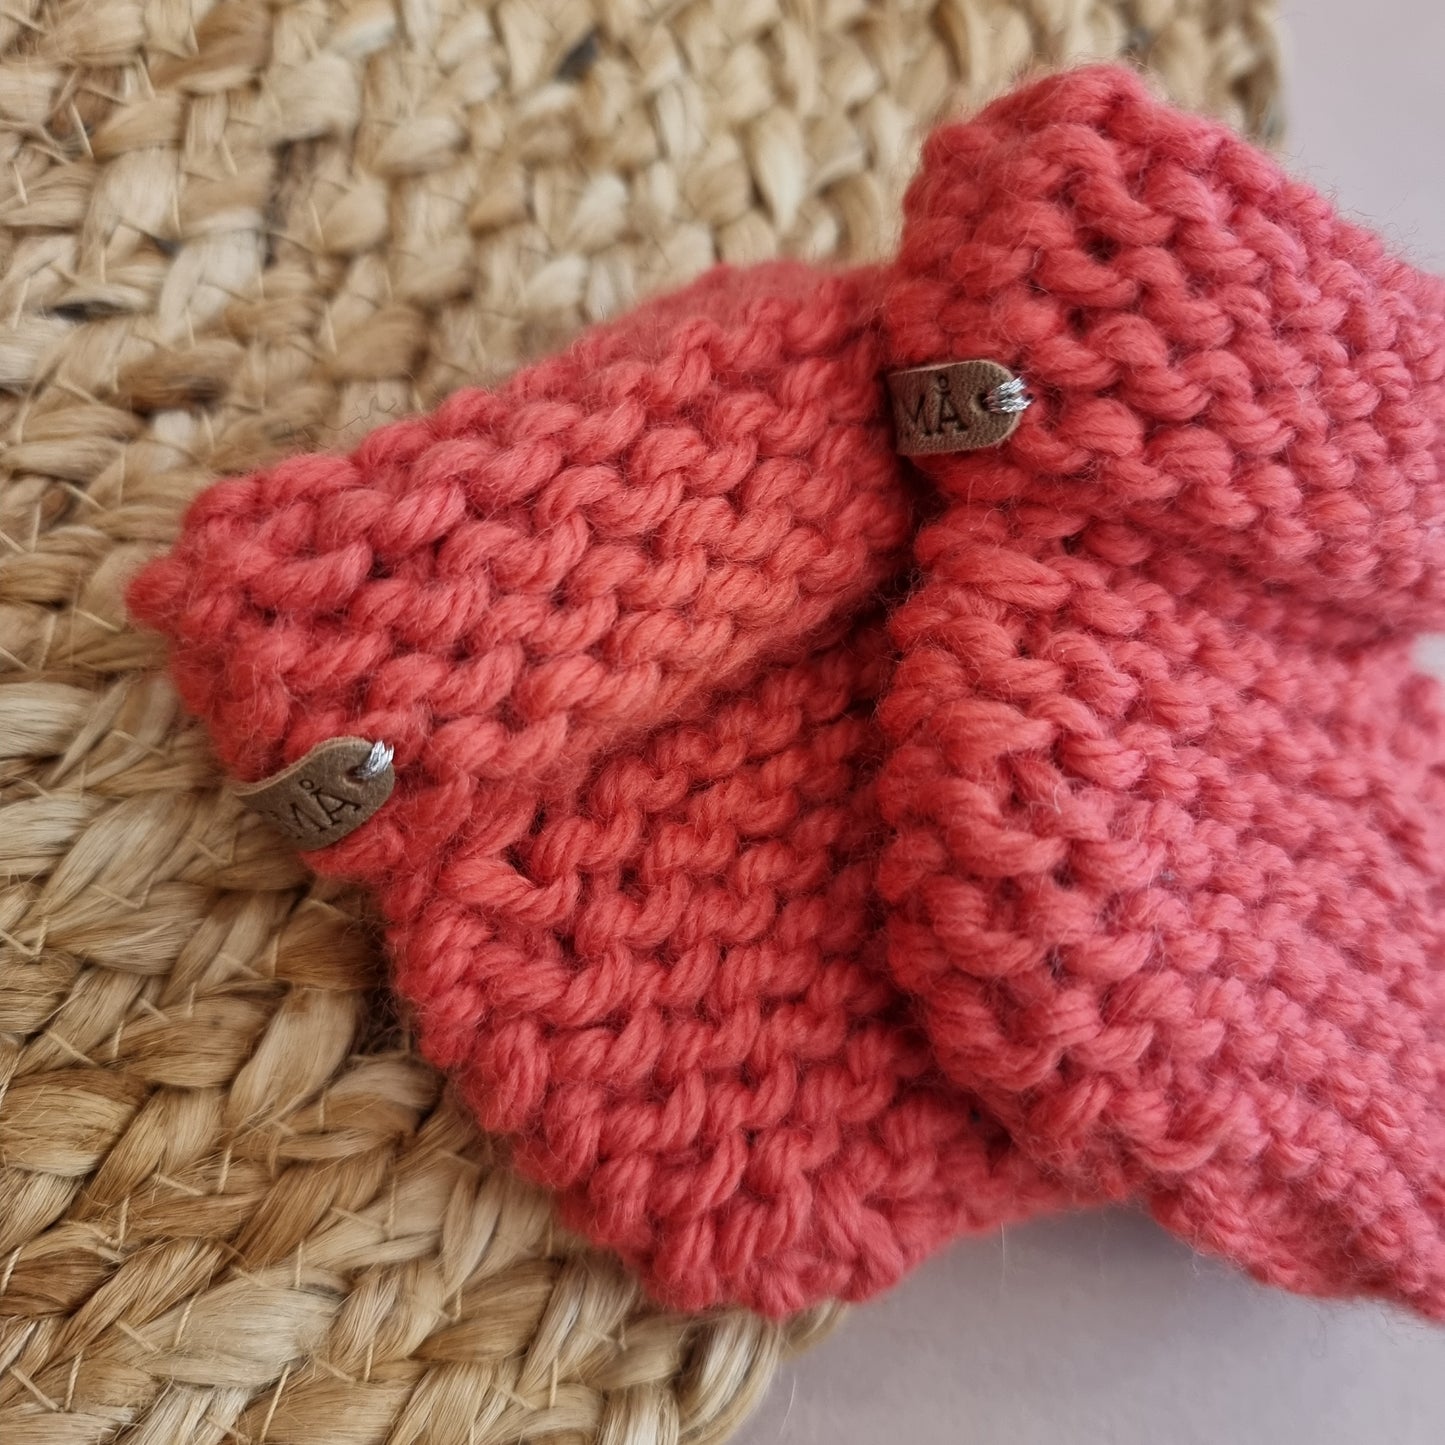 CHUBBY hand knitted booties - coral